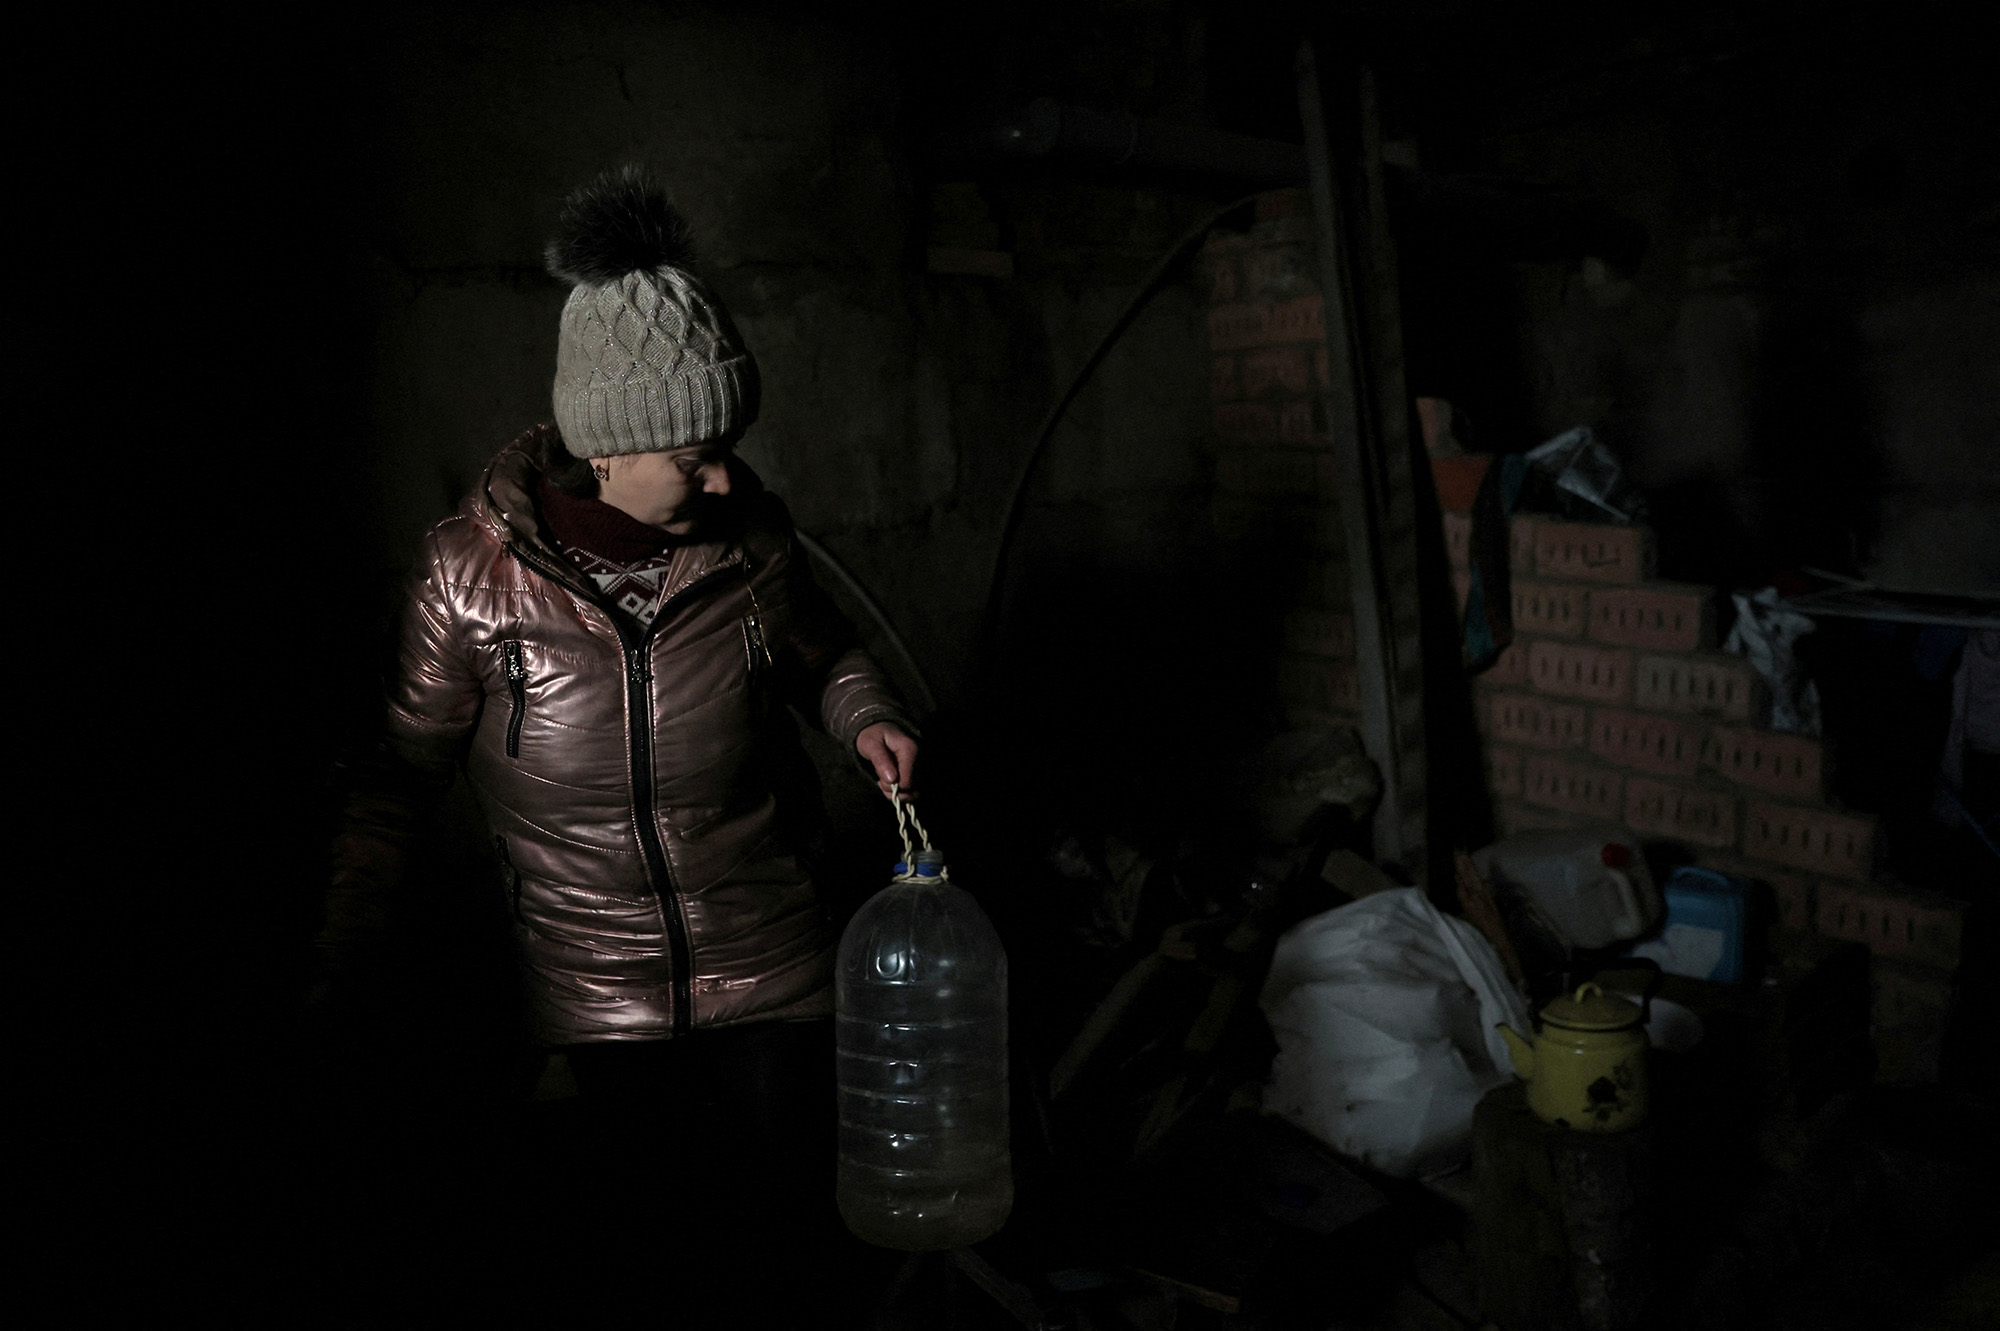 Lilia, 44, pours water into a pot to boil in the basement of an apartment building where she is currently living without power, water or heat in Siversk, Ukraine, on December 4.